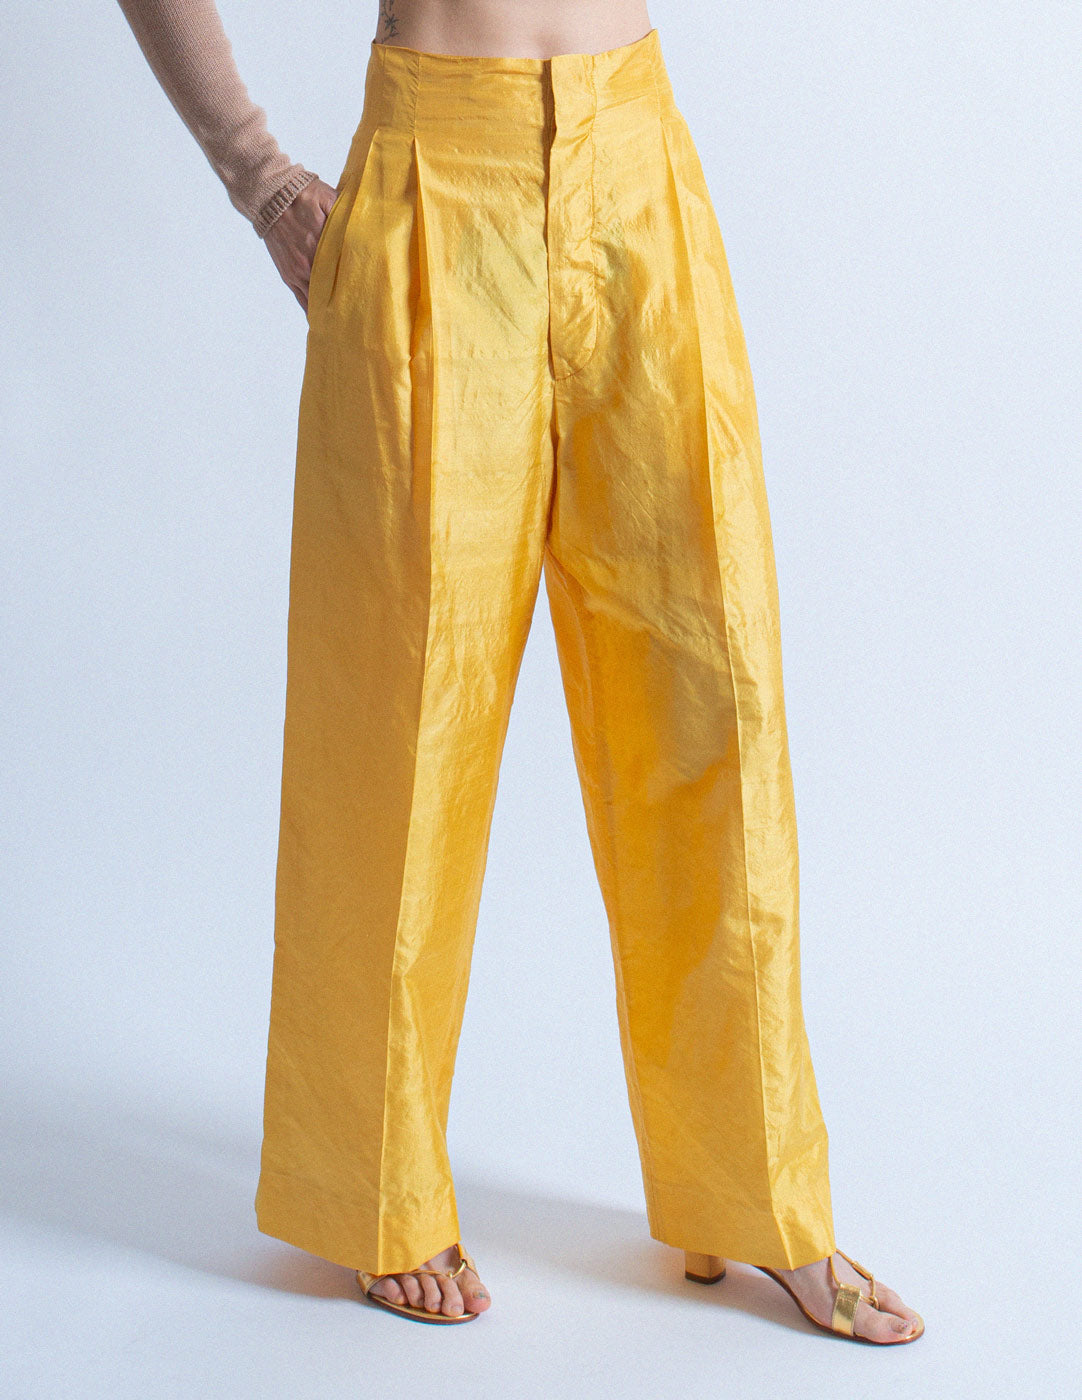 Romeo Gigli vintage marigold high waisted silk trousers side detail